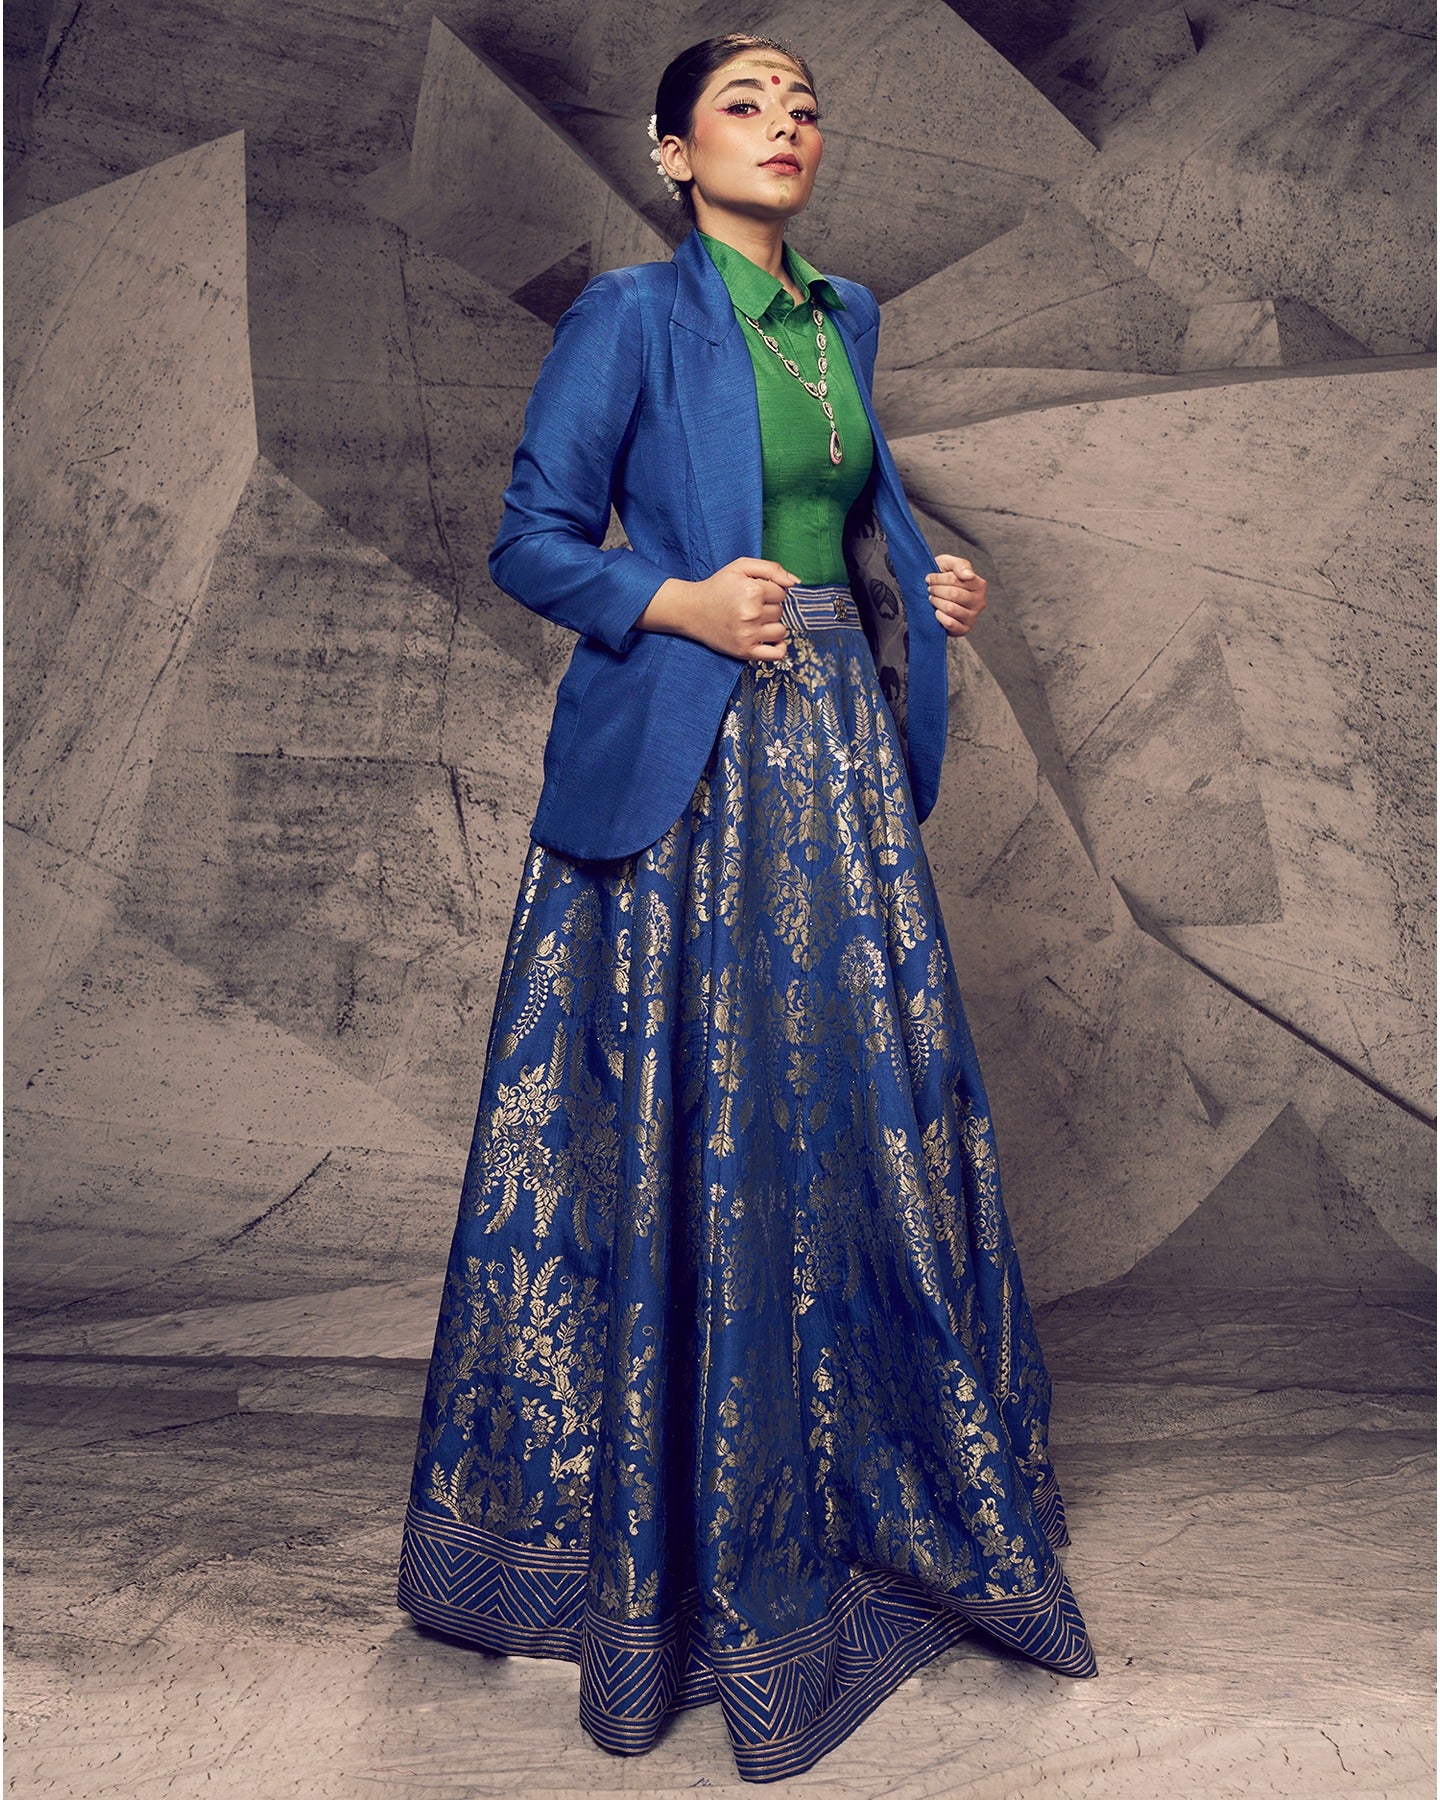 Drenched in the hues of nature, this blue and green lehenga with a collared shirt and blazer is a modern masterpiece.